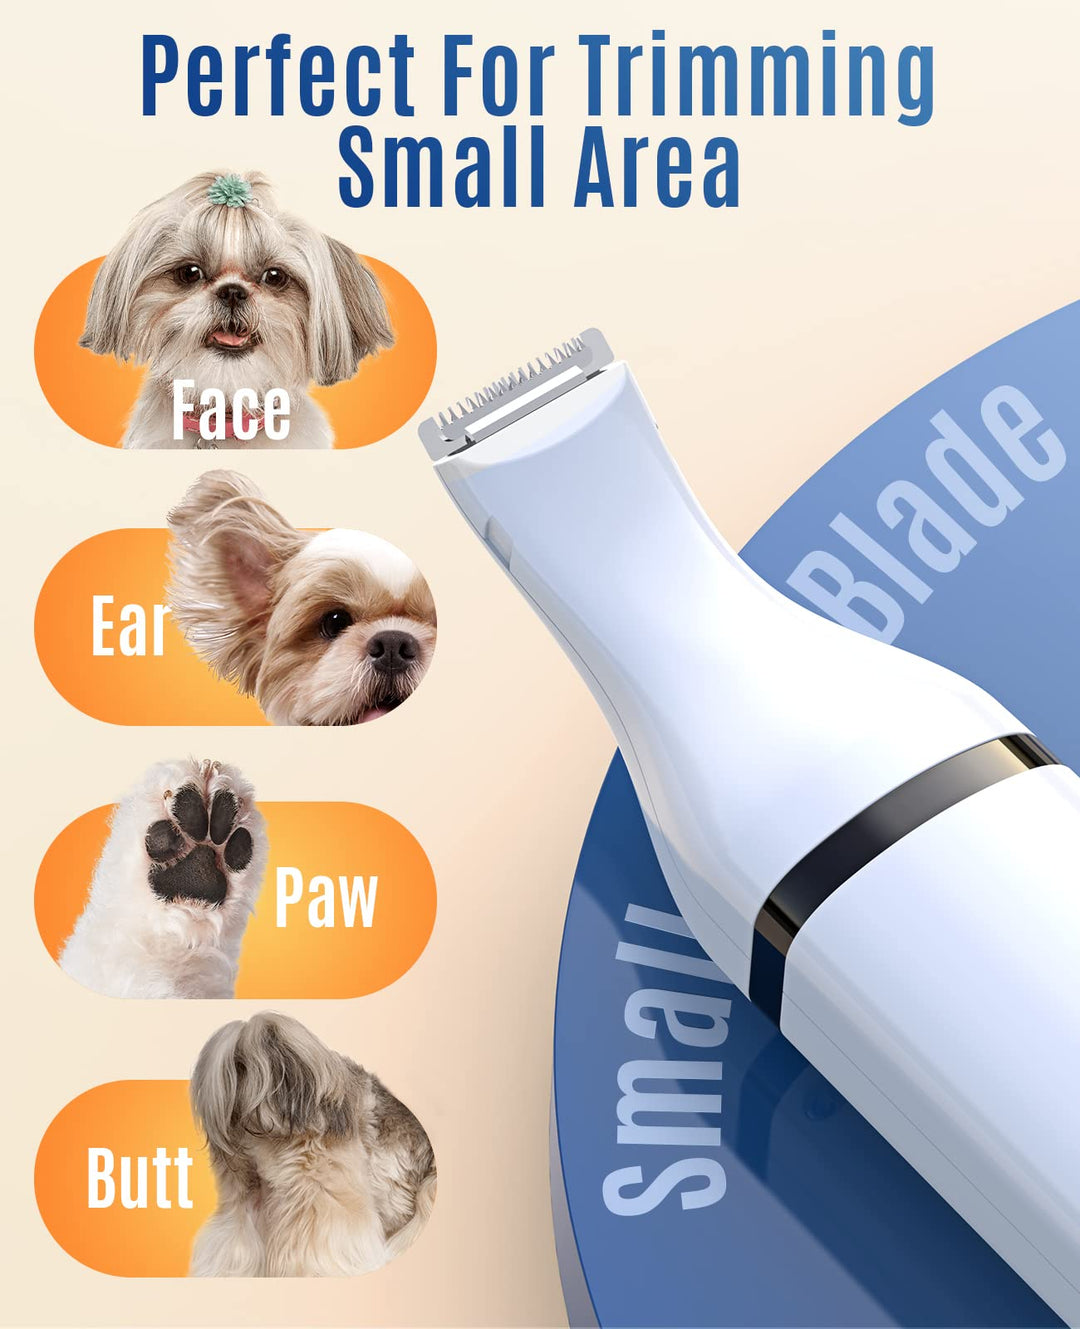 oneisall Dog Clippers with Double Blades,Cordless Small Pet Hair Grooming Trimmer,Low Noise for Trimming Dog's Hair Around Paws, Eyes, Ears, Face, Rump (White)